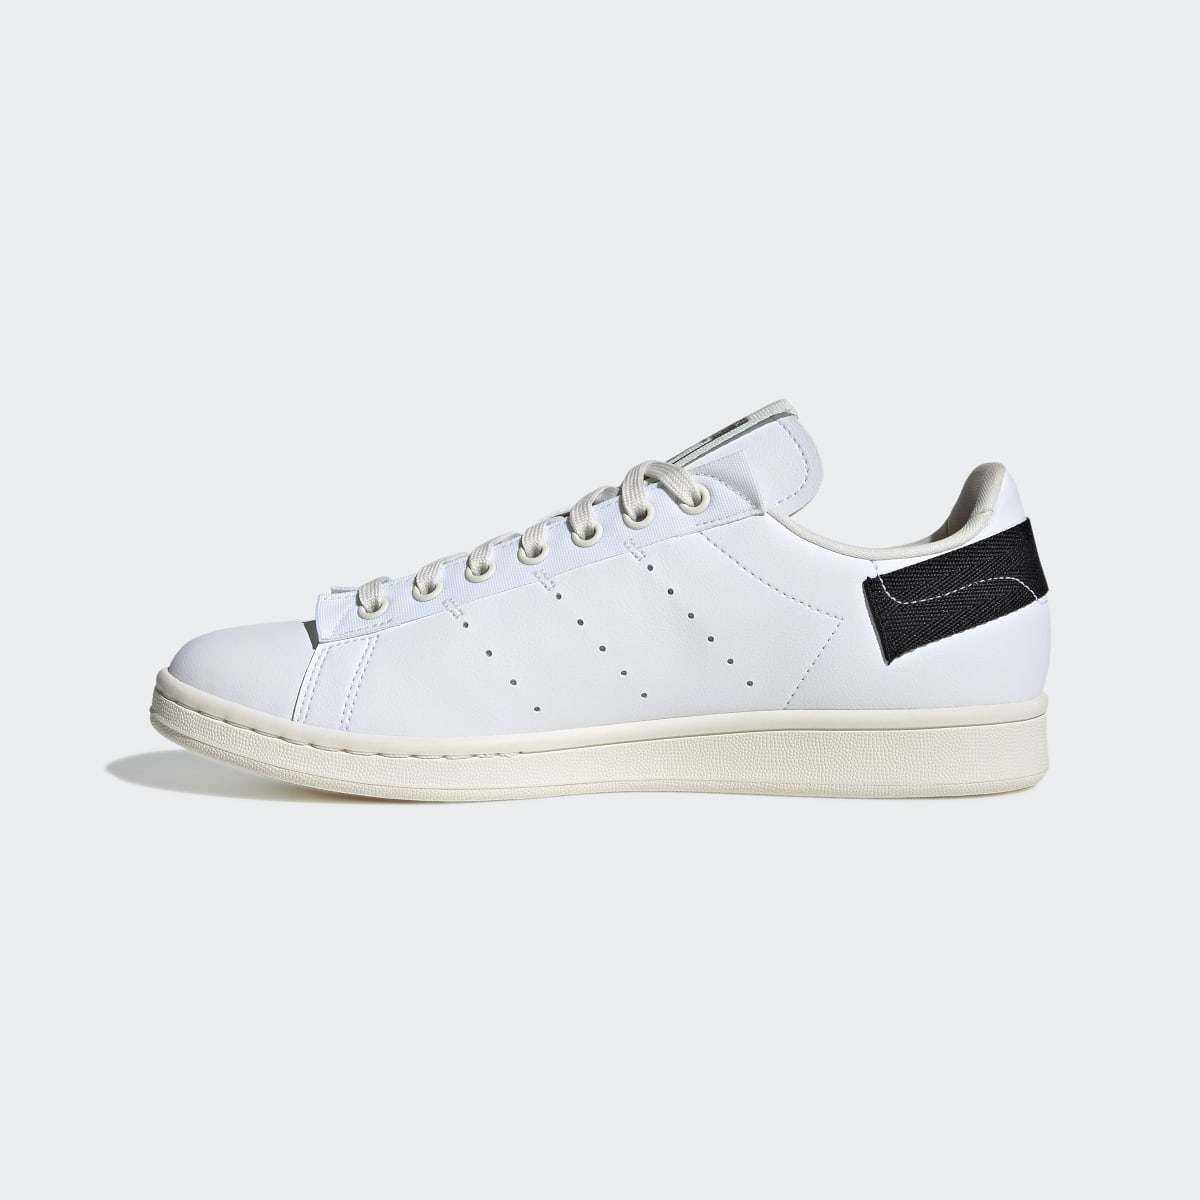 Adidas Stan Smith Parley Shoes. 11